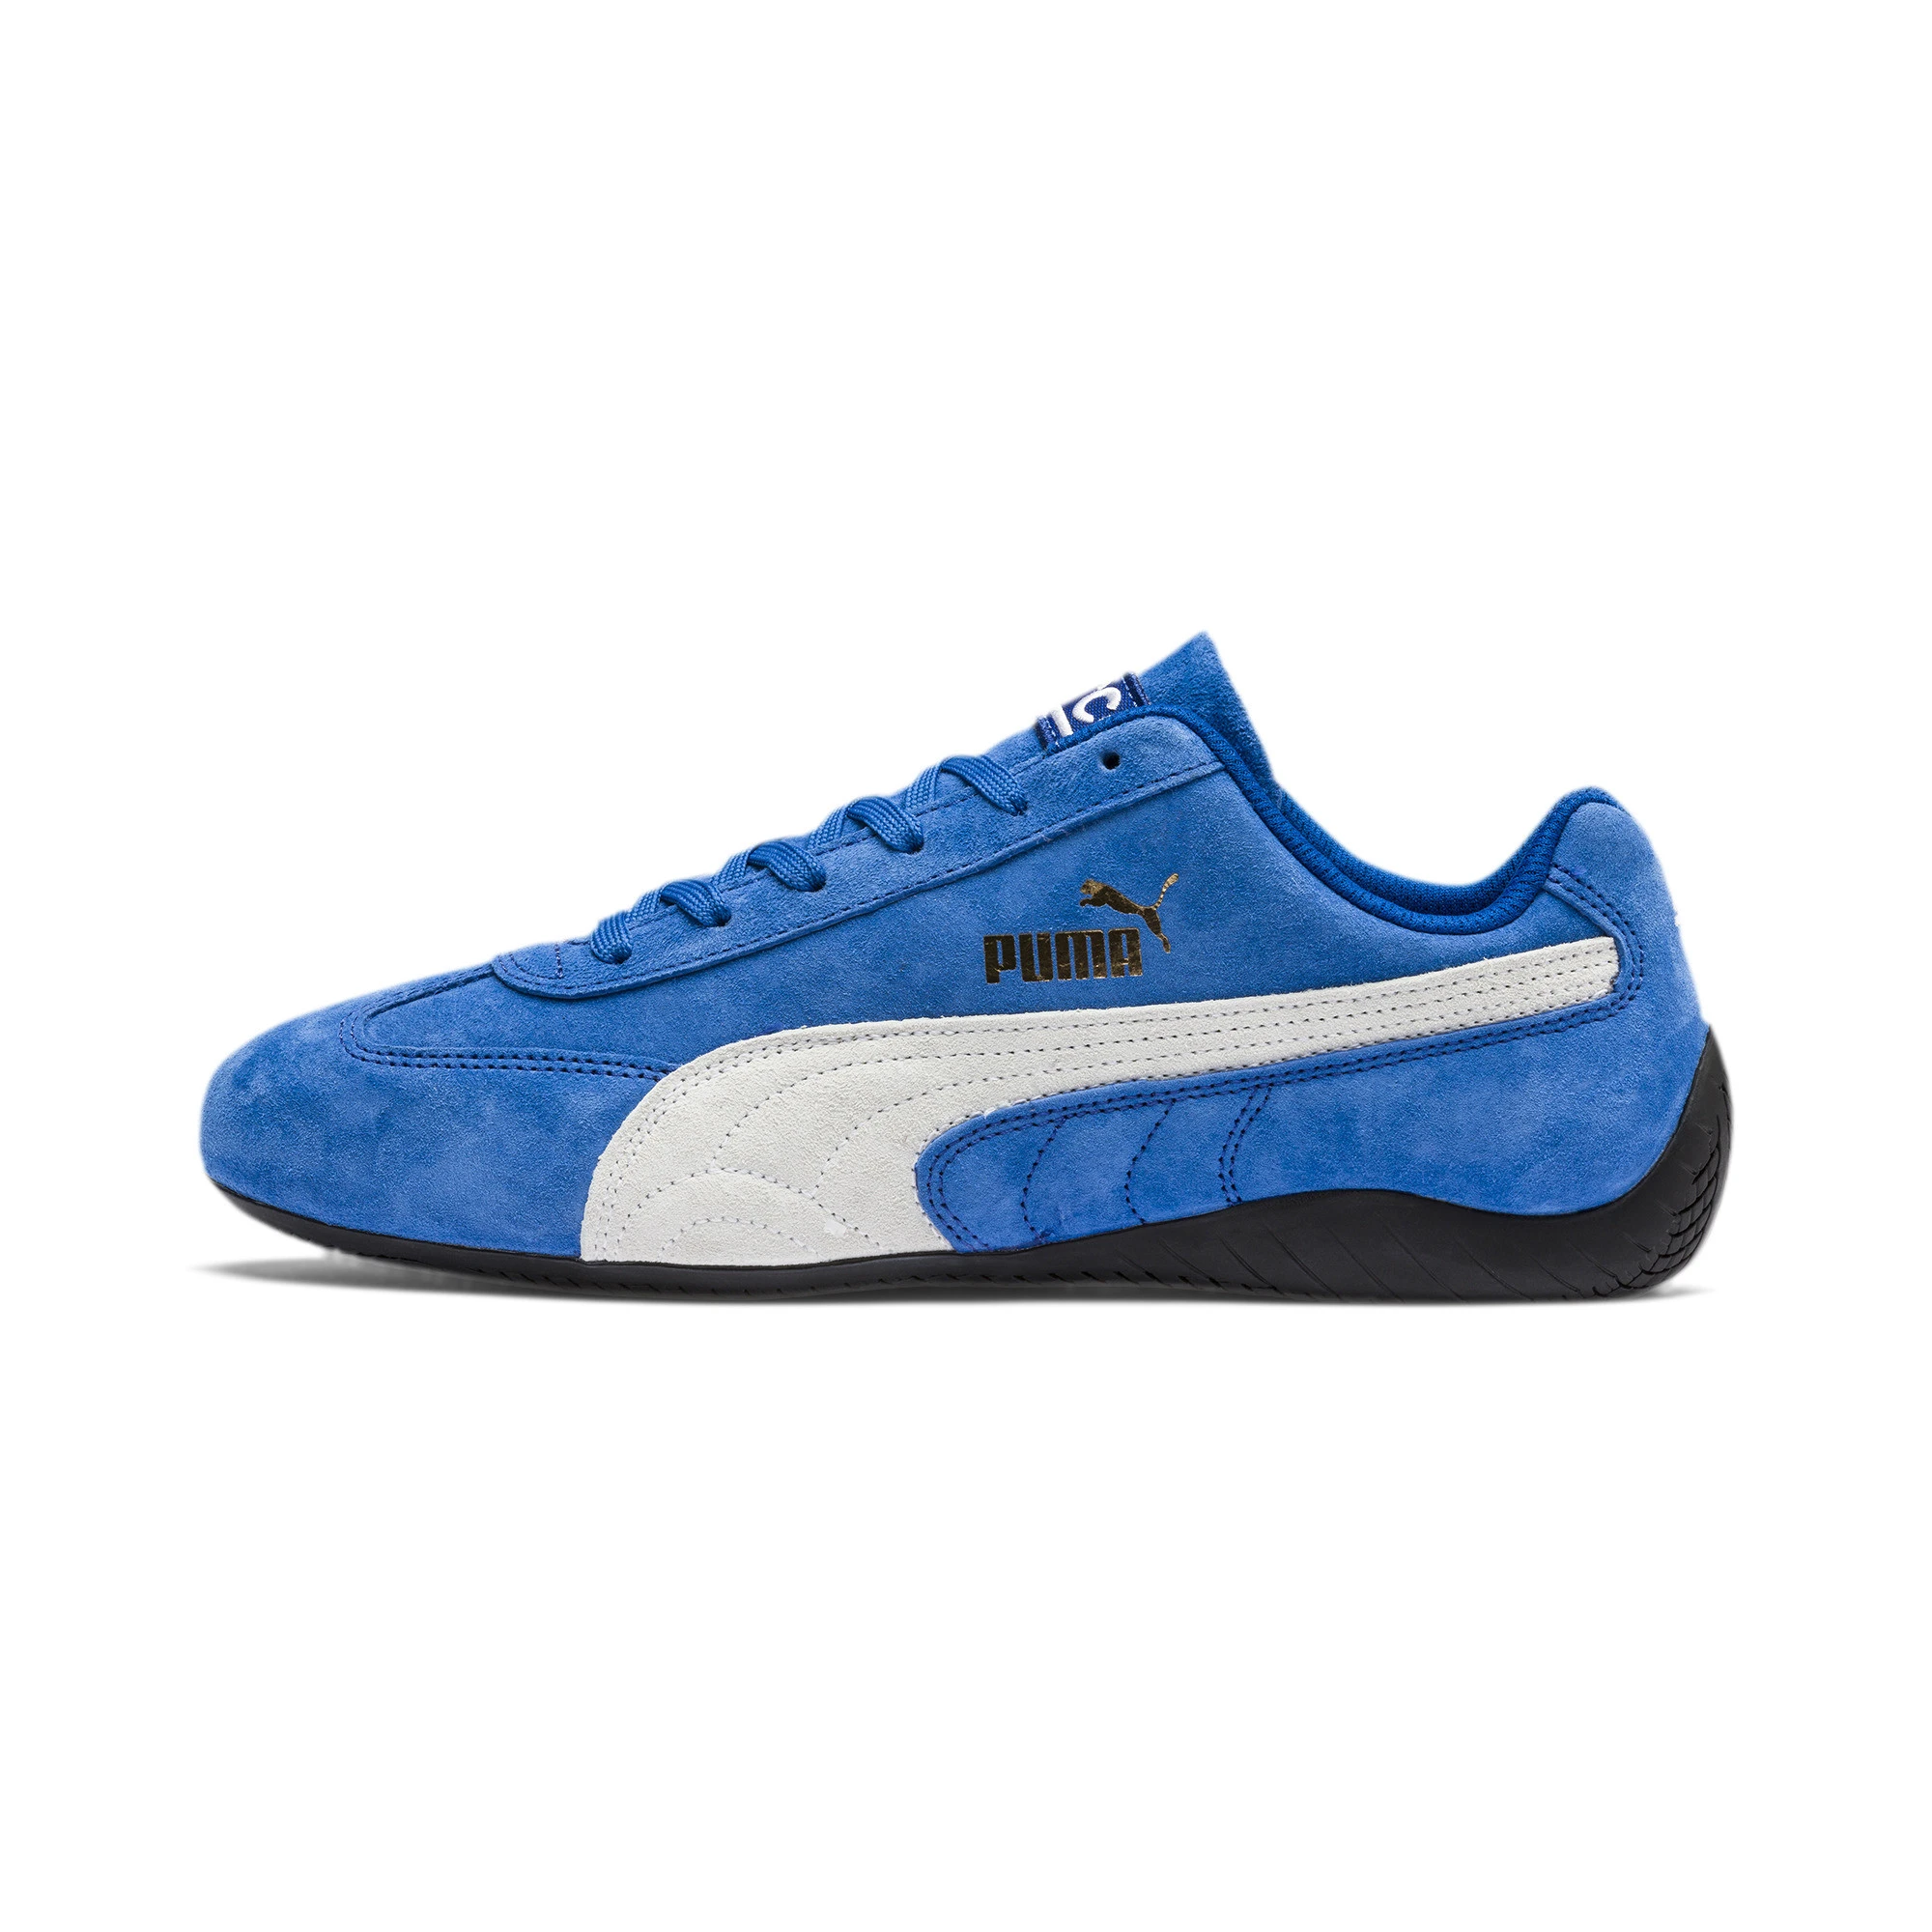 Sneakers PUMA Speedcat OG Sparco Men's sports shoes for walking and trail  running male пума cougar Puma puma|Men's Vulcanize Shoes| - AliExpress